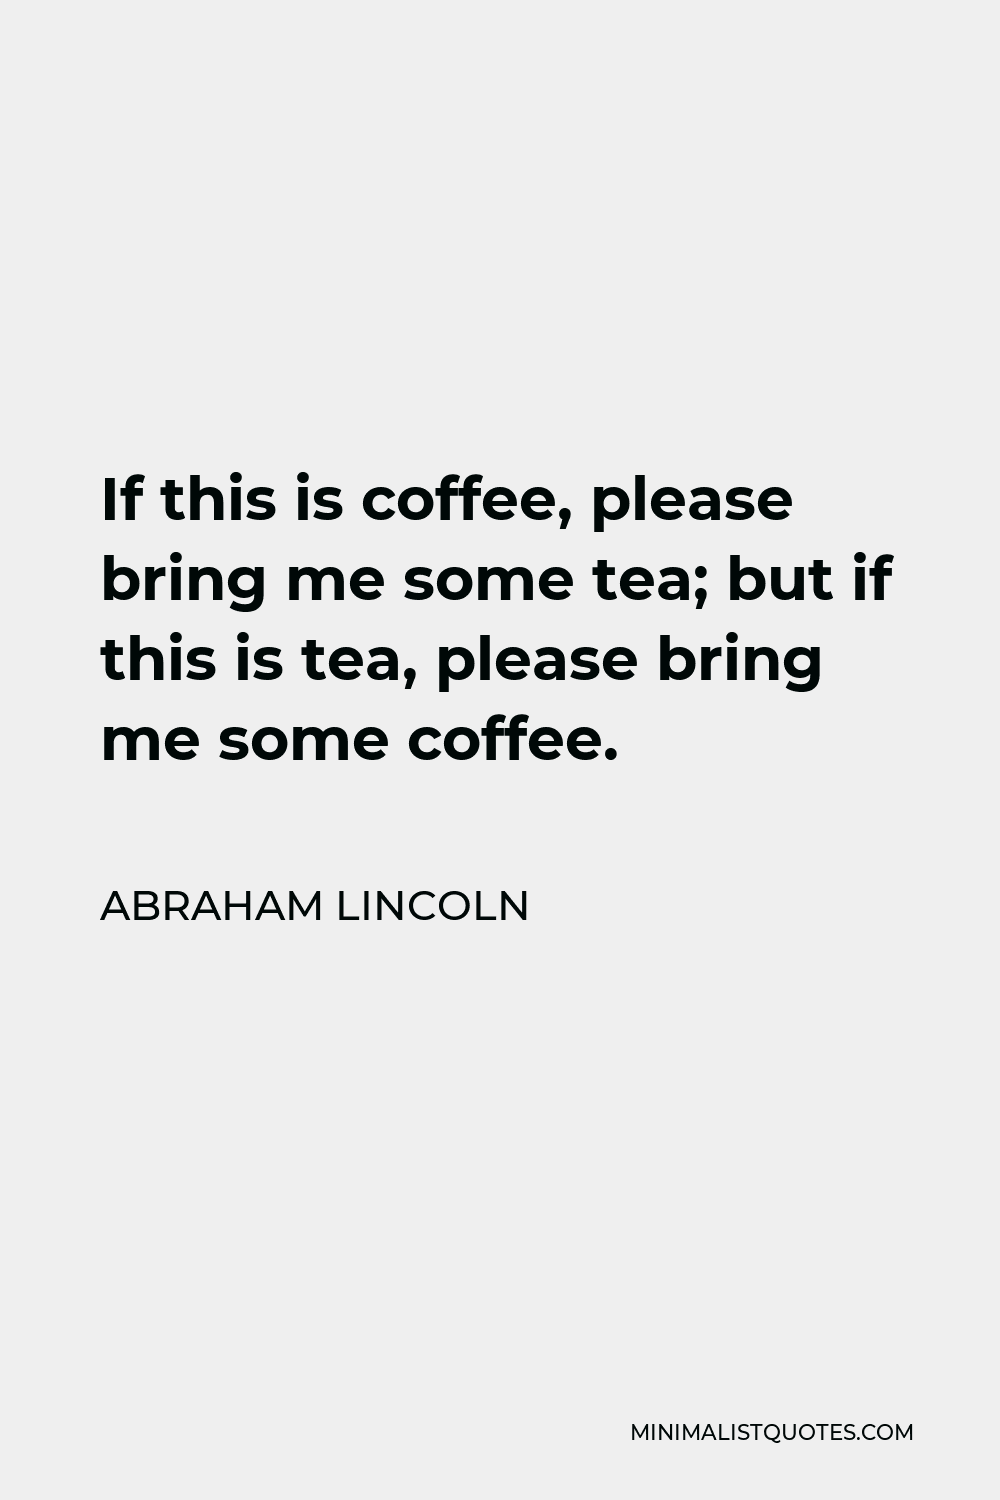 Abraham Lincoln Quote - If this is coffee, please bring me some tea; but if this is tea, please bring me some coffee.